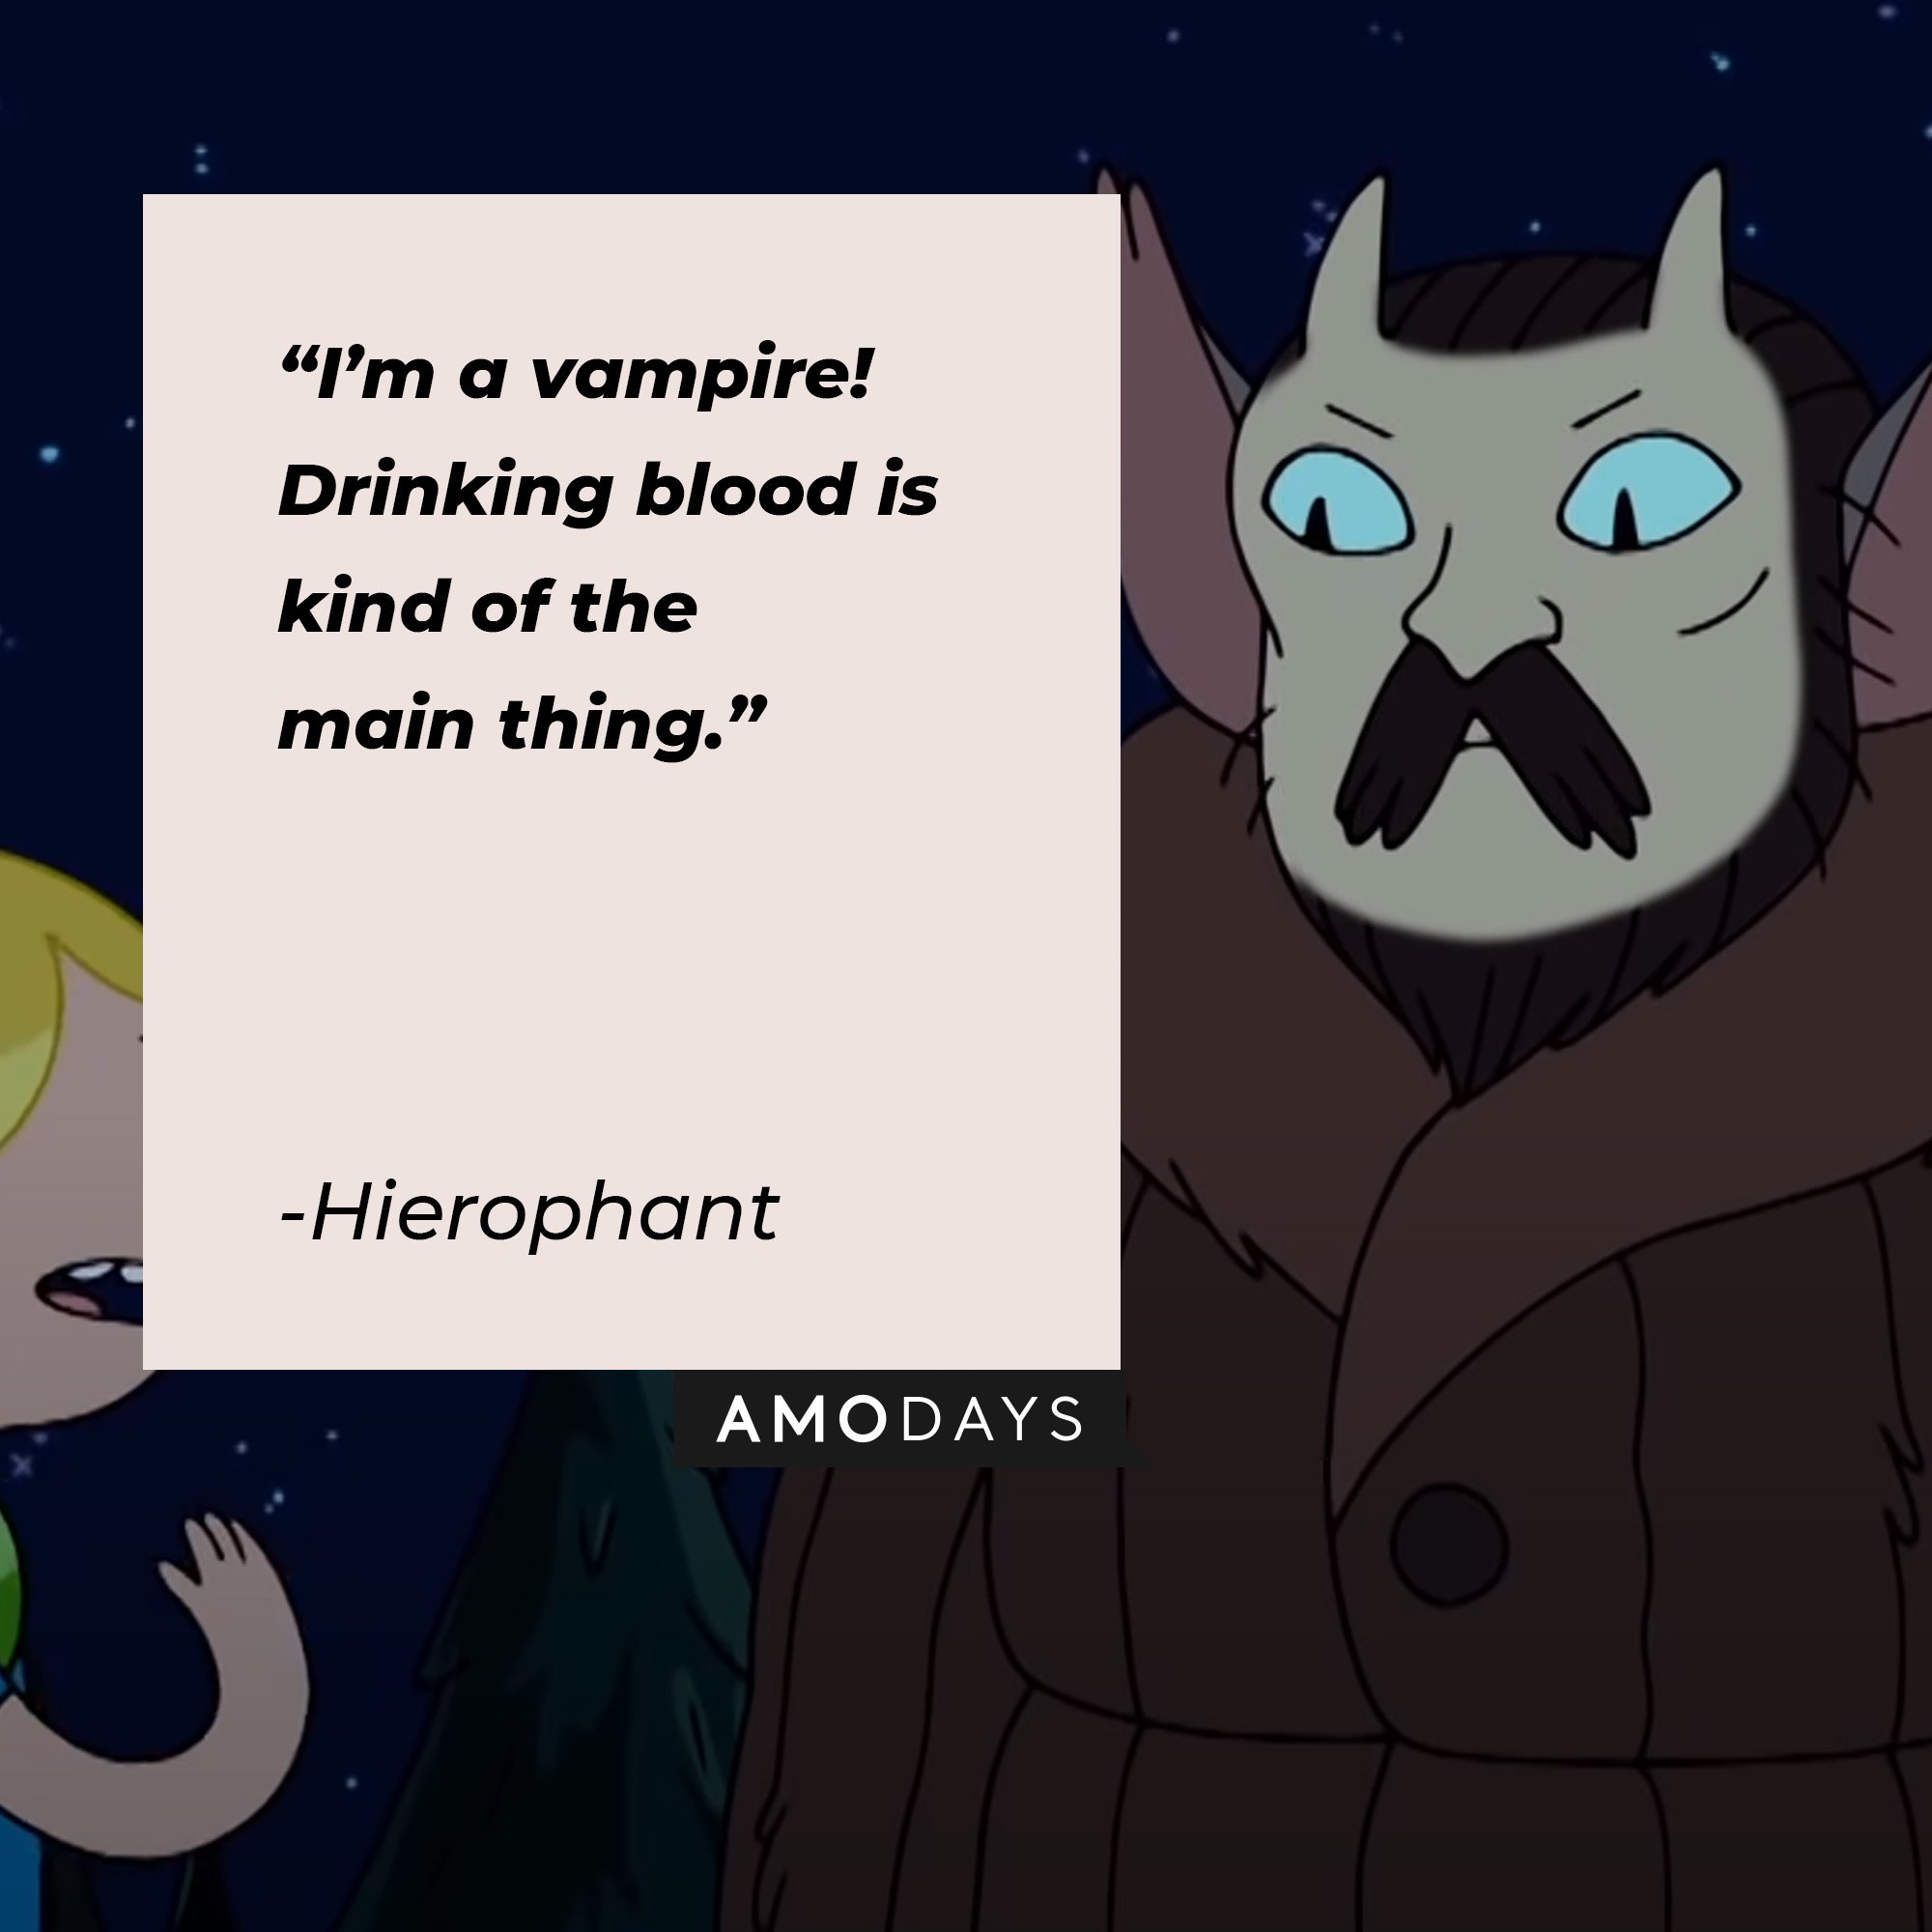  Hierophant’s quote: “I’m a vampire! Drinking blood is kind of the main thing.” | Image: AmoDays